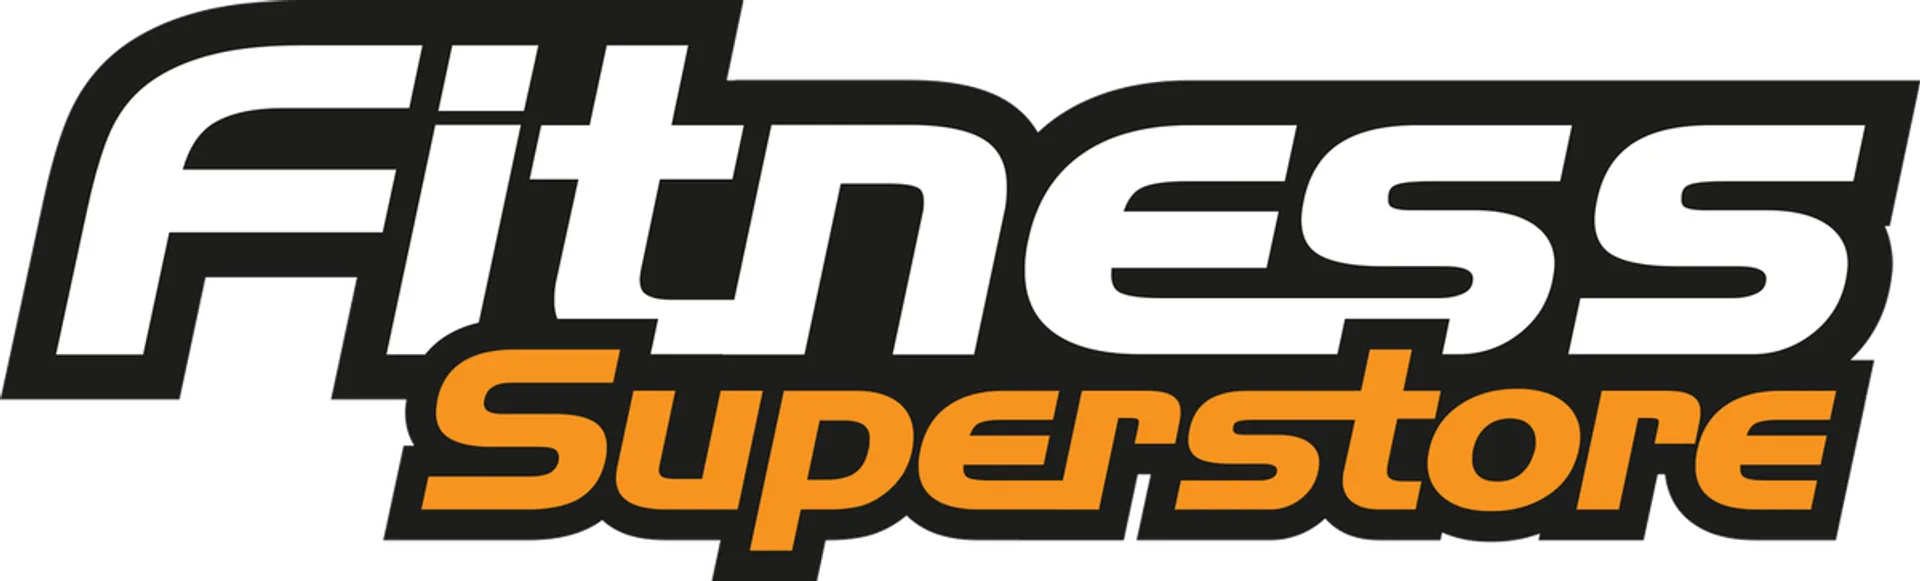 FITNESS SUPERSTORE logo